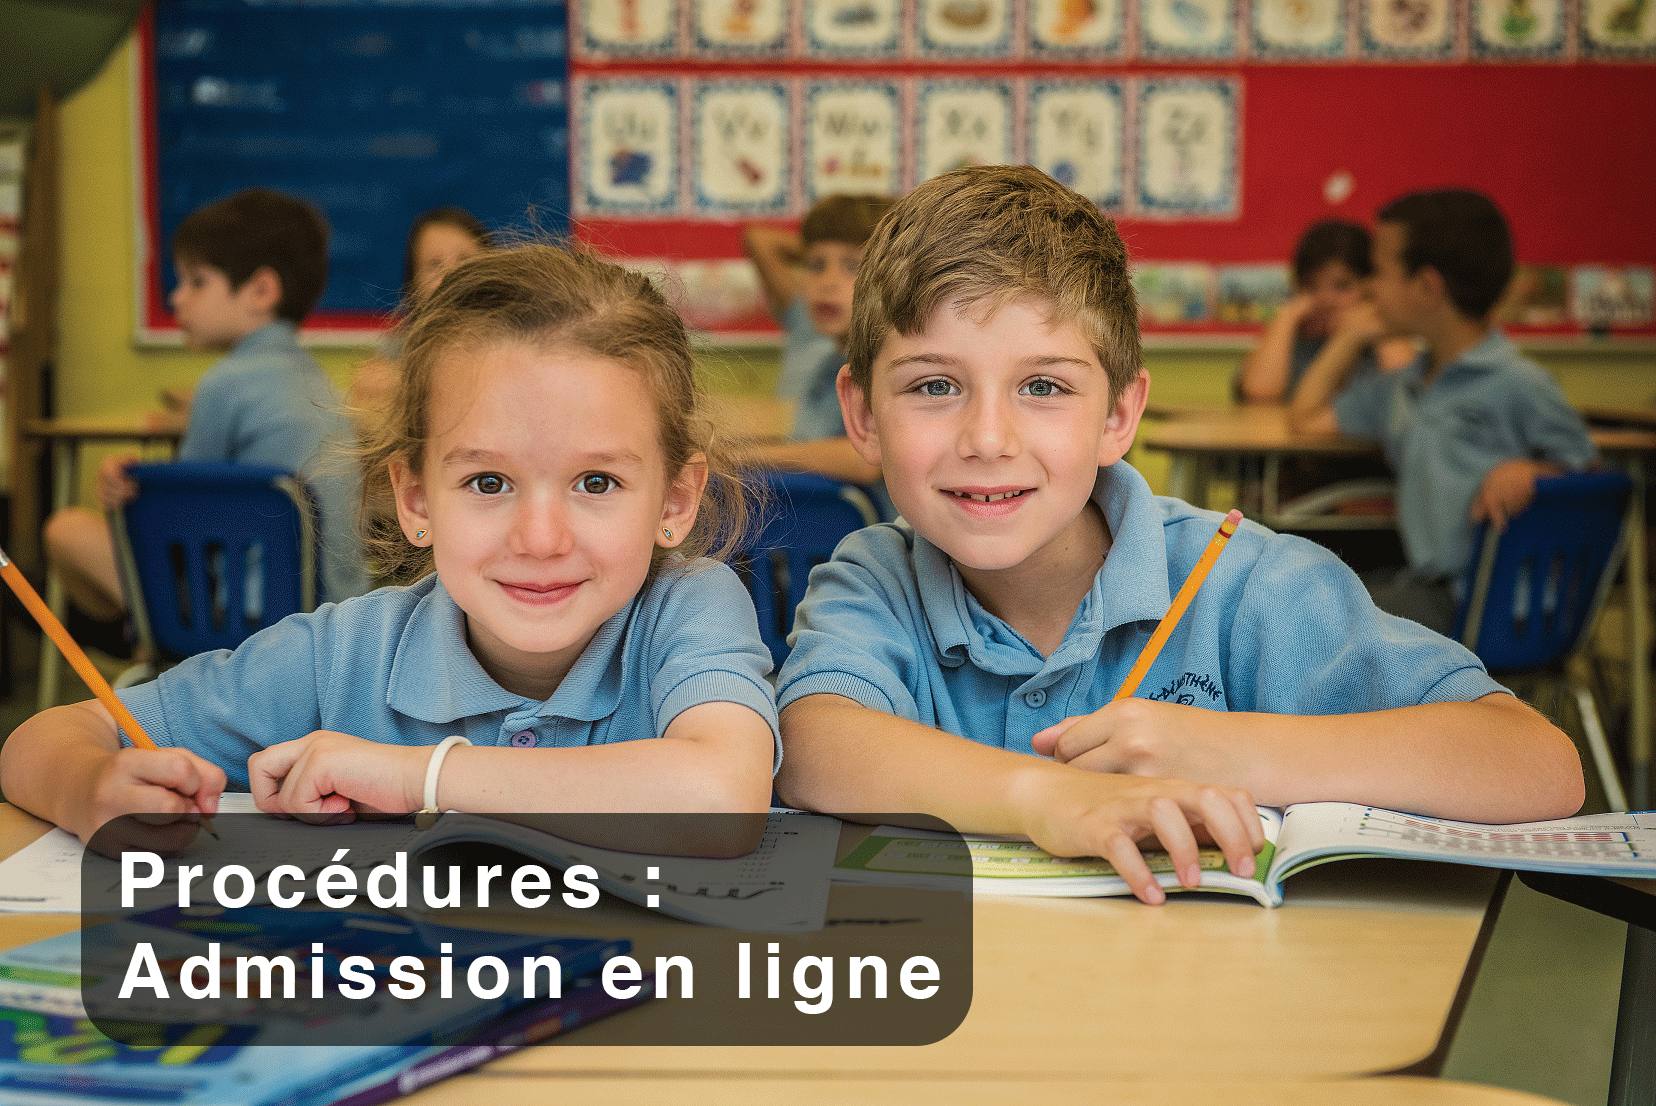 Private Hellenic School Montreal,
Online admissions,
Private elementary school,
French curriculum